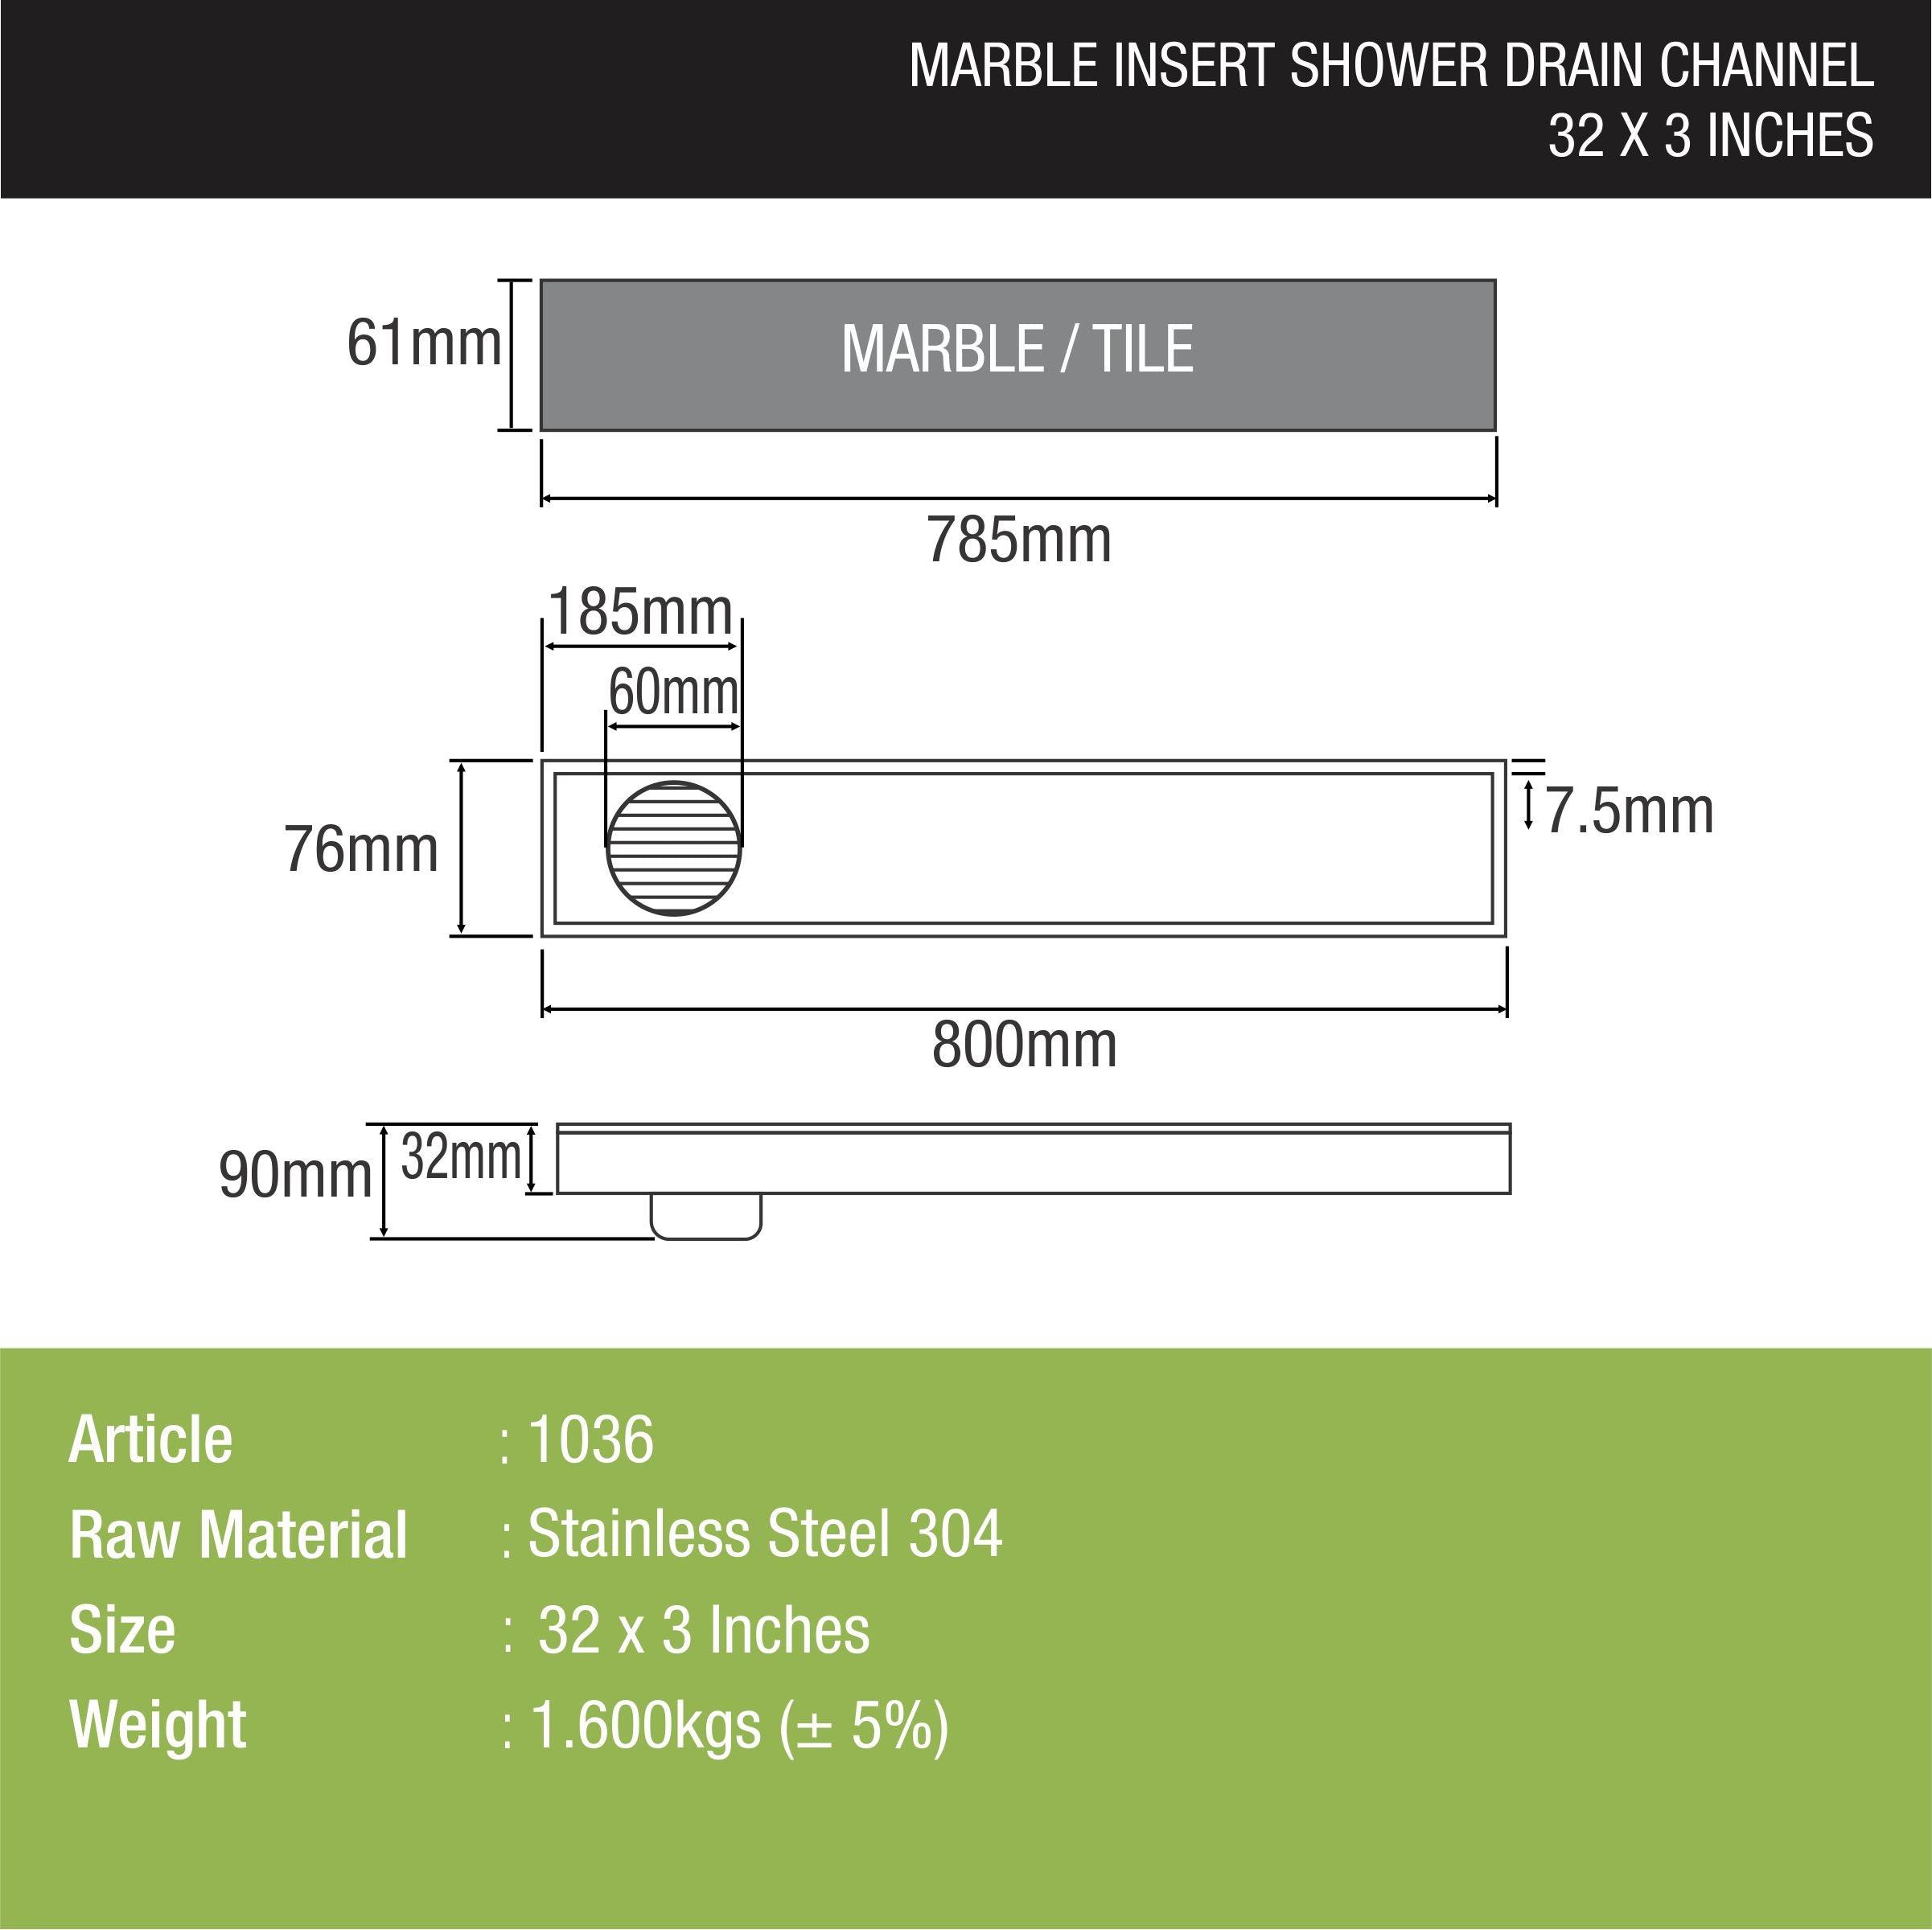 Marble Insert Shower Drain Channel (32 x 3 Inches) sizes and dimensions